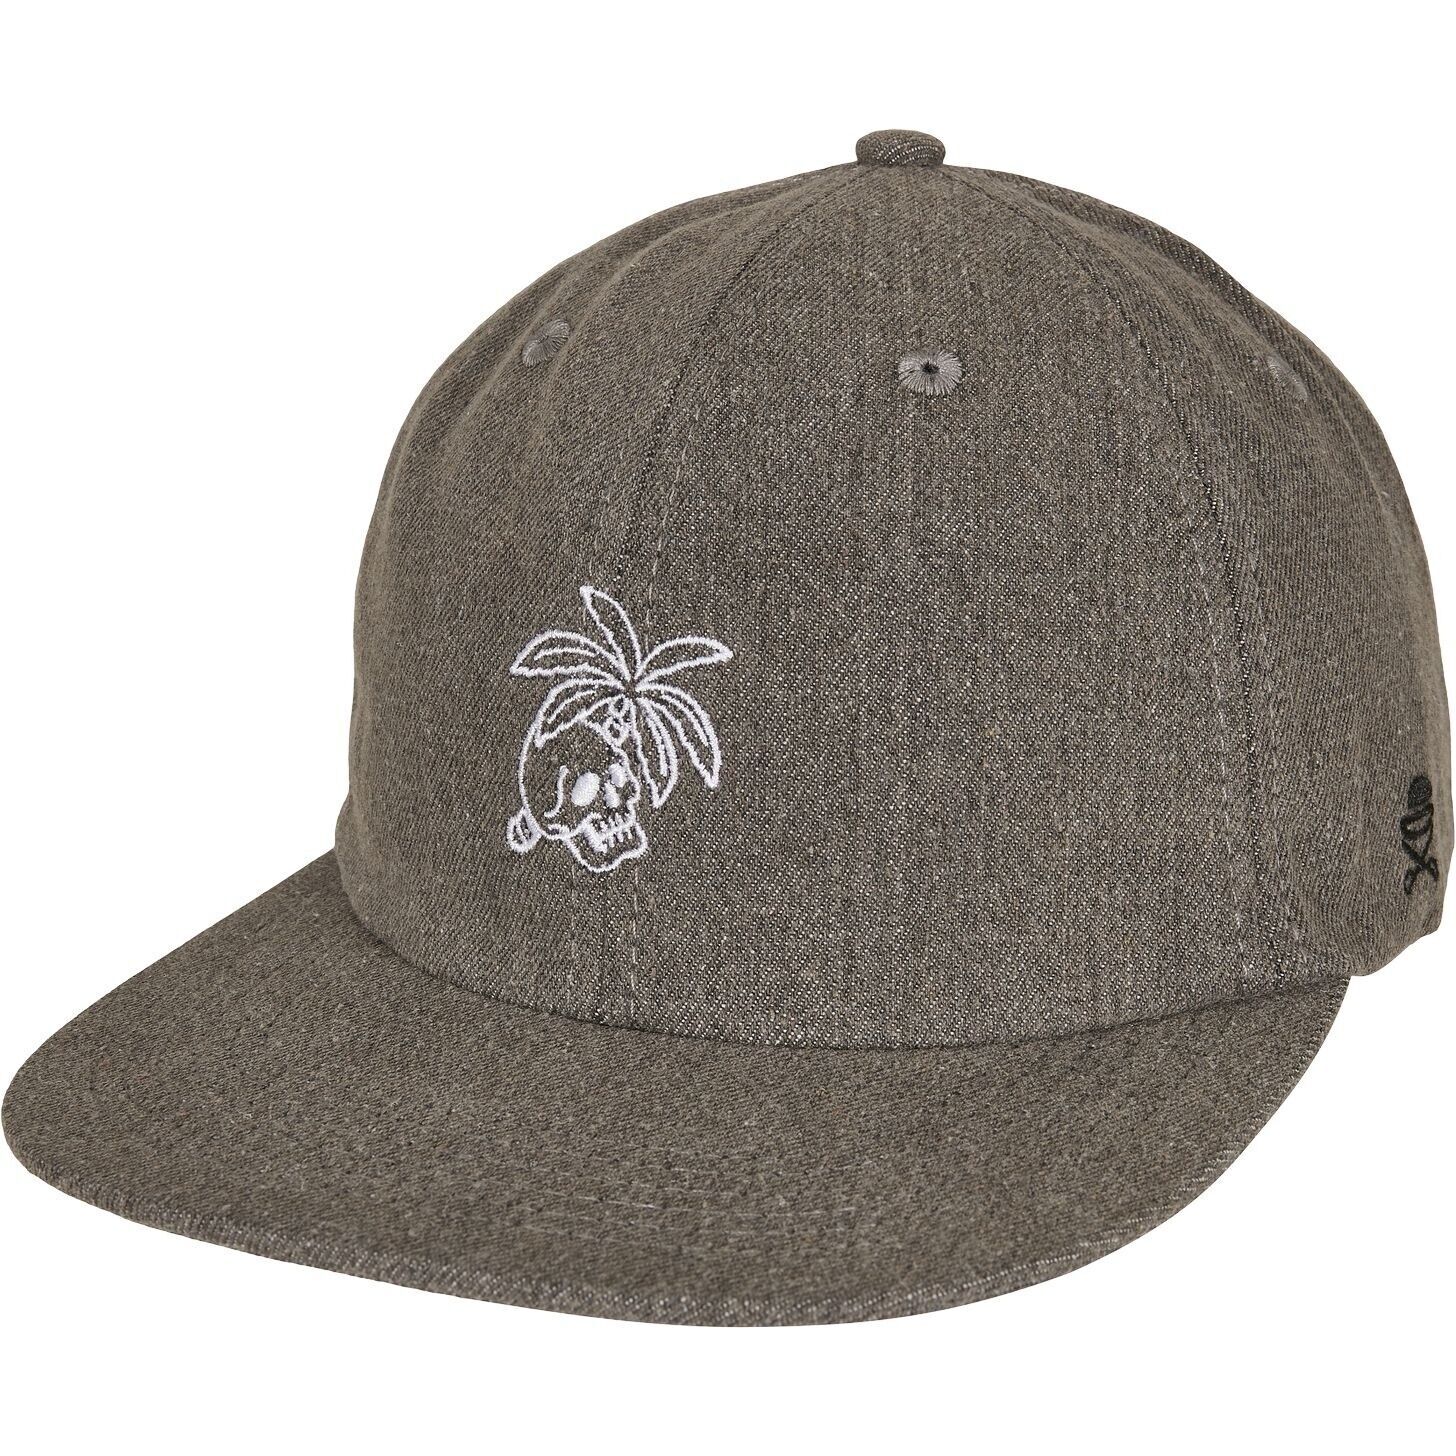 casquette strapback cayler & sons wl vacay mode